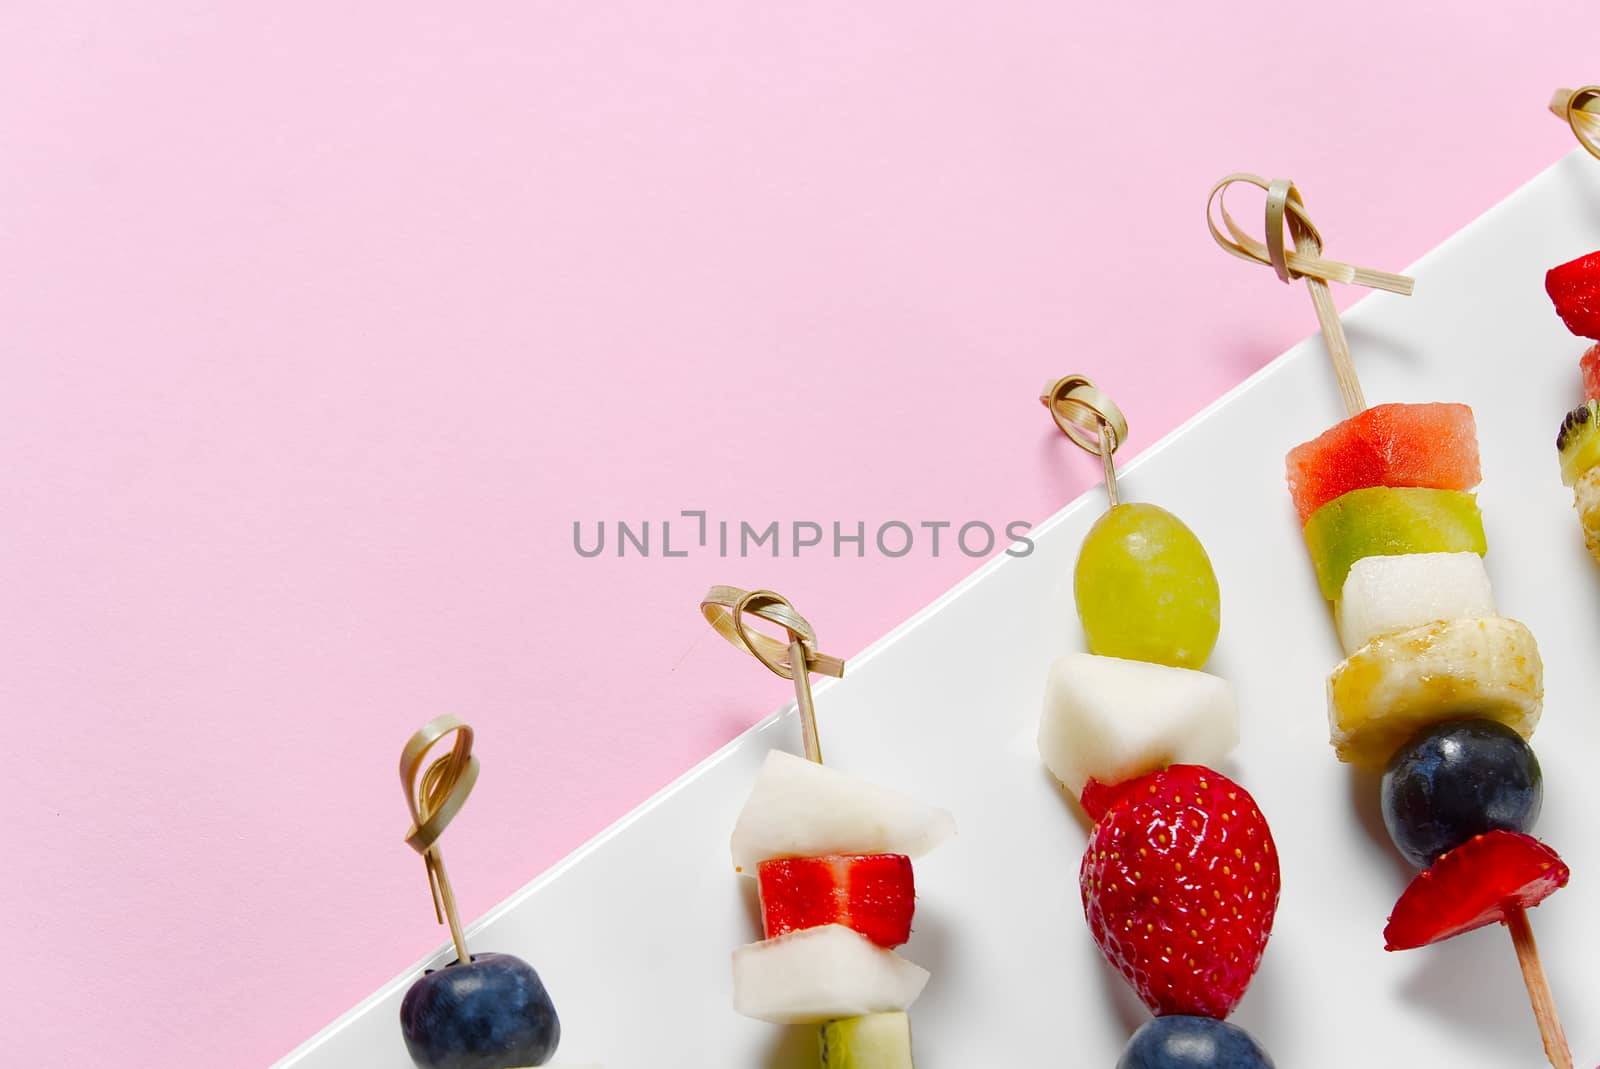 Fruit canapes. Fresh fruit canapes on white plate. Mixed fruit in white plate healthy food style. pink backgrounds